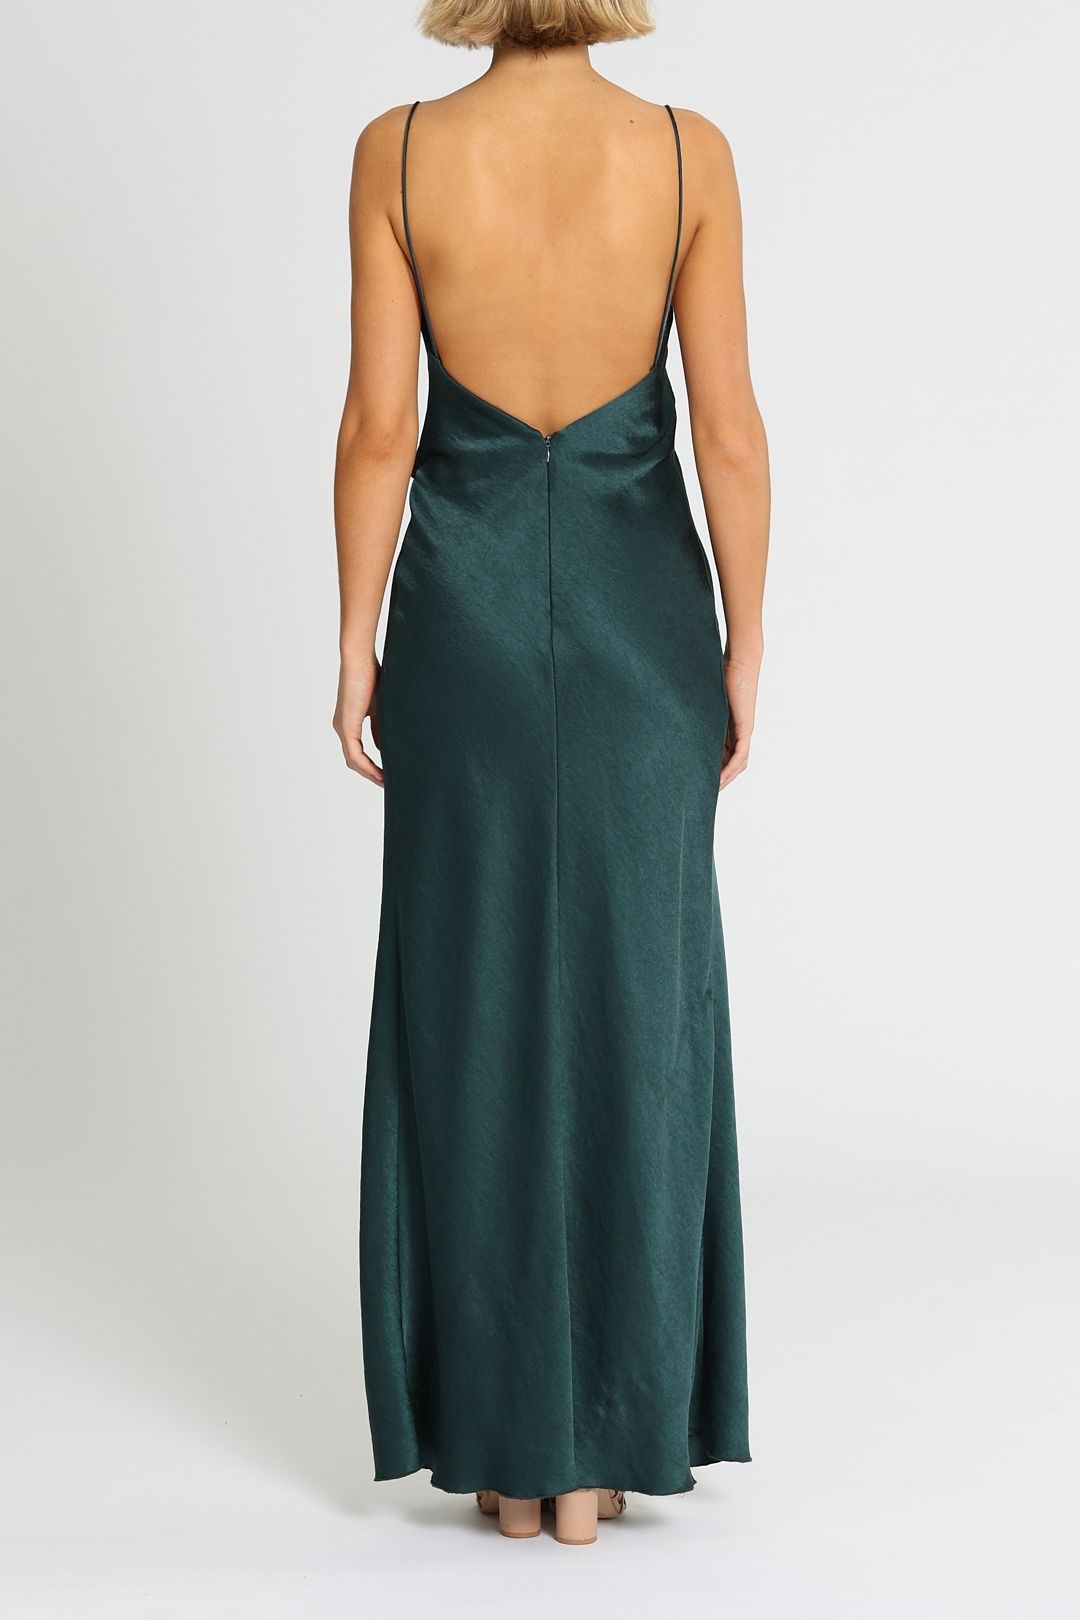 Camilla and Marc Bowery Slip Dress Fitzgerald Green Open Back